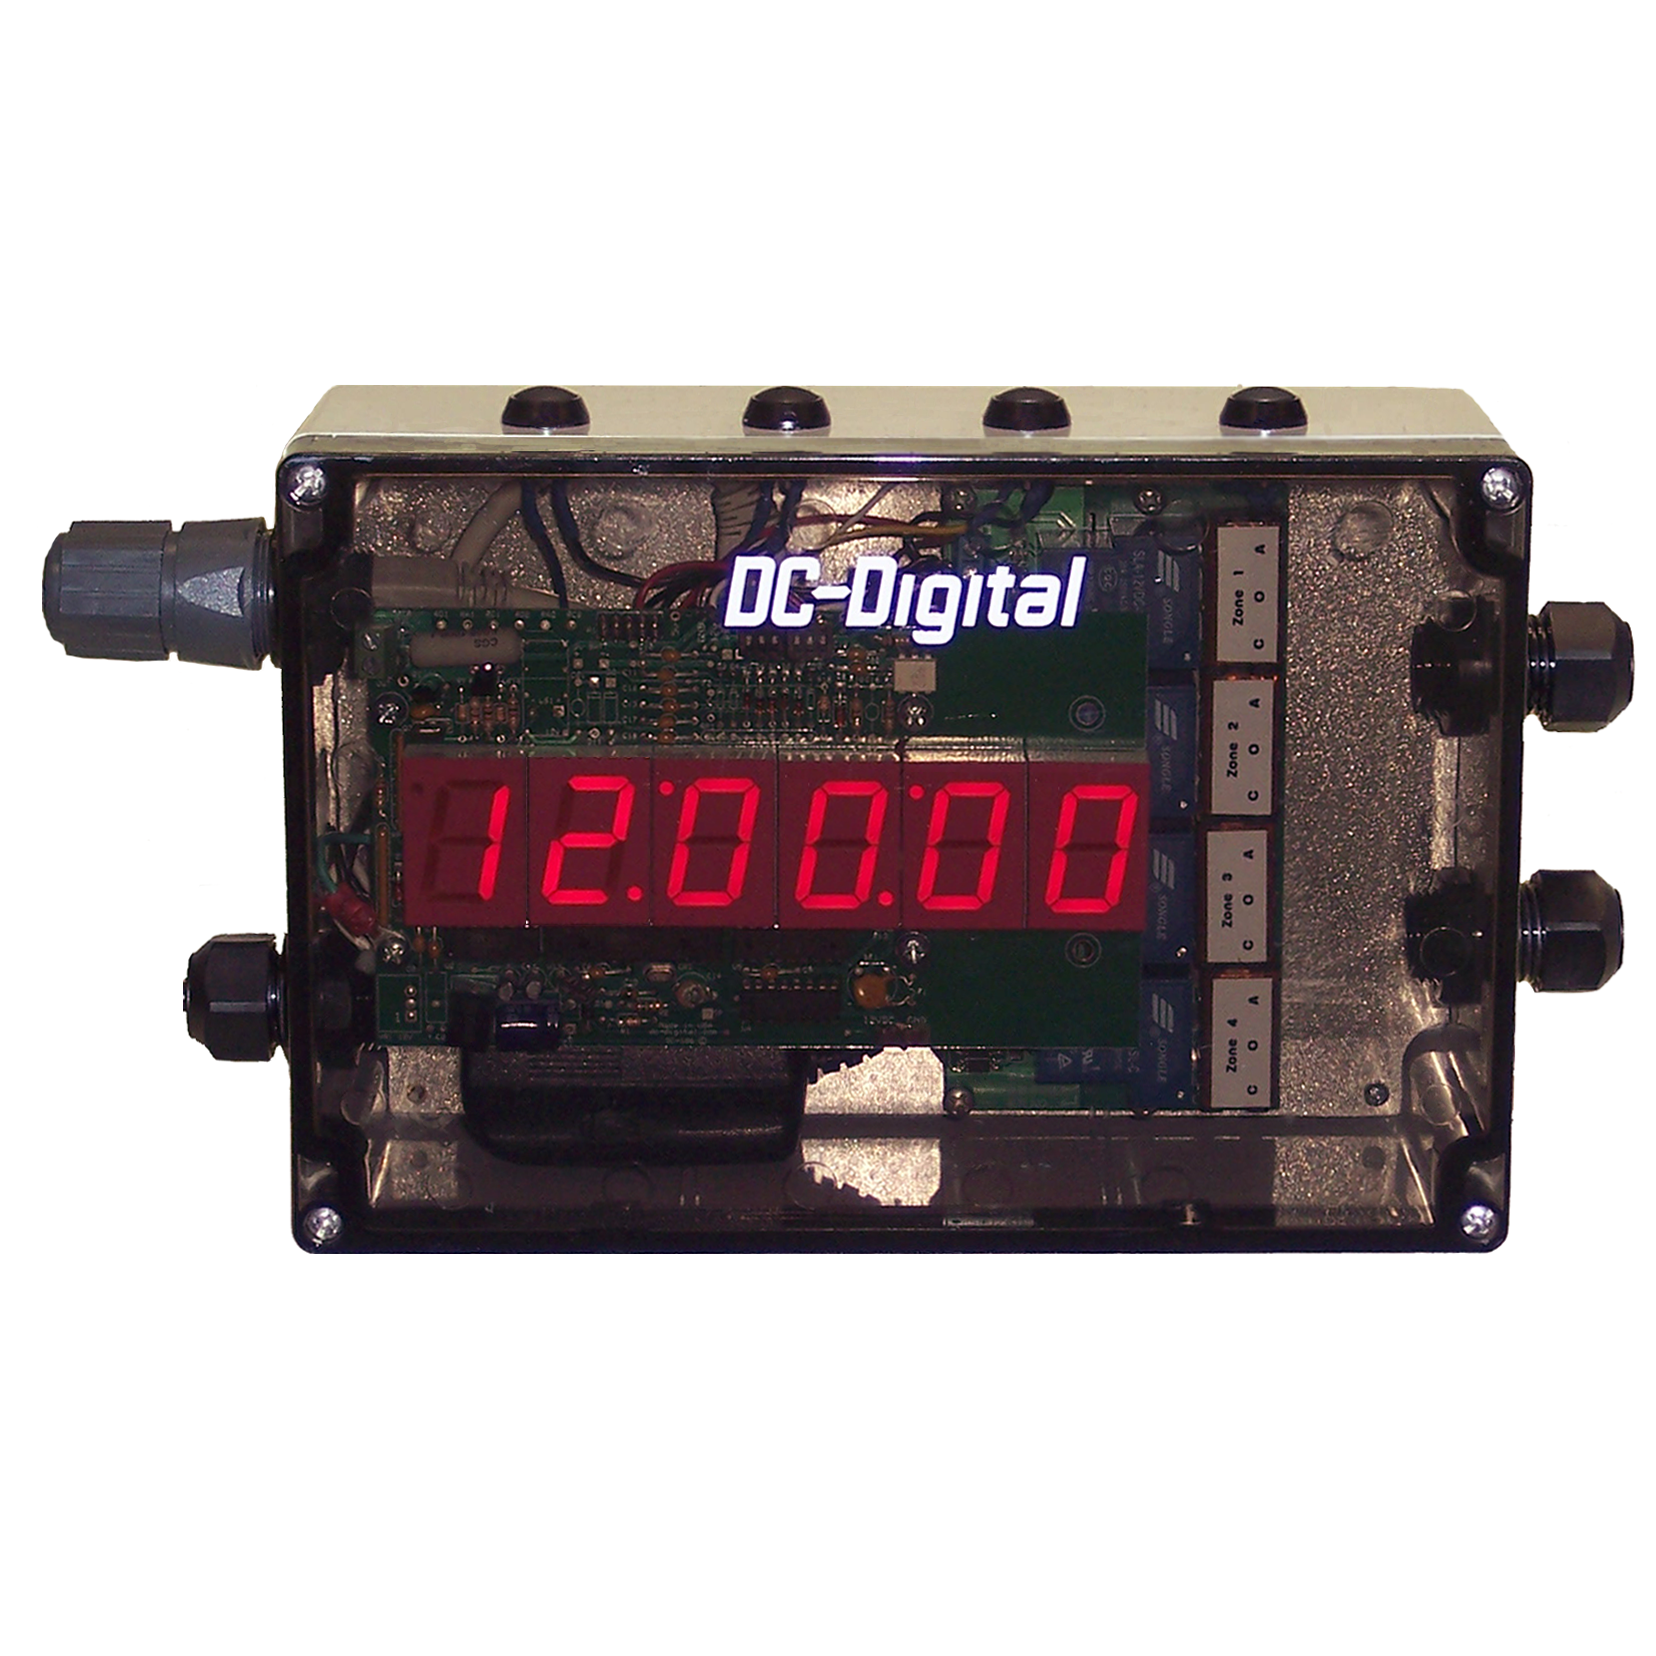 (DC-106N-RM-4-W) EZ-Time Synchronized and Controlled, Network to Wireless Time of Day Clock Output (W) and 4-Zone High Power Relay Outputs with IP-66 Enclosure